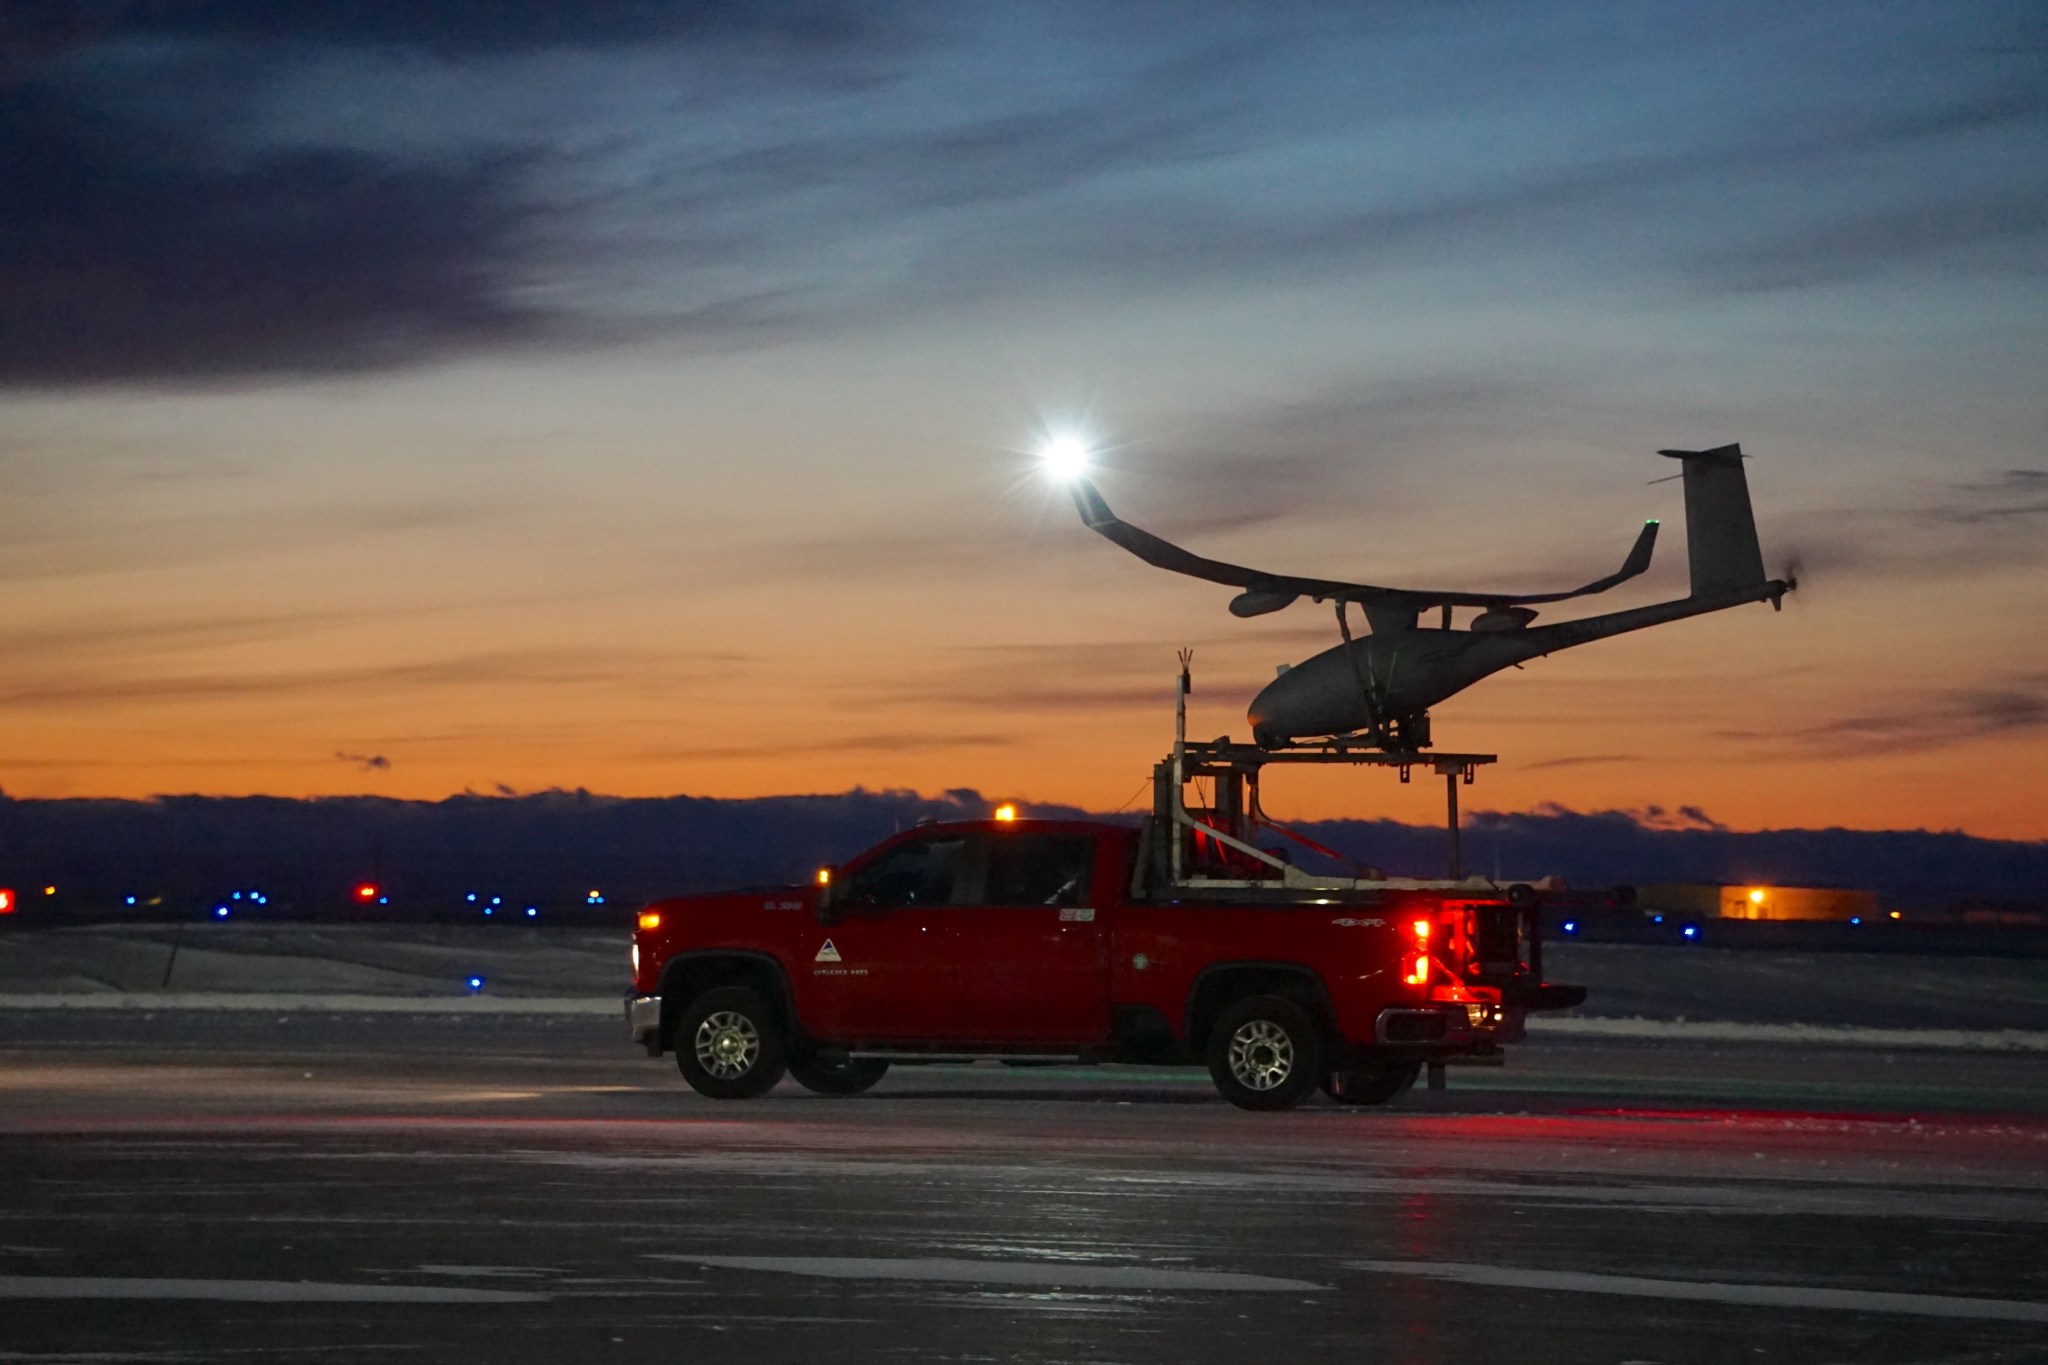 Fixed-wing drone prepares for takeoff in Deadhorse, Alaska. The drone looks like a tiny airplane mounted on the back of a red pickup truck. The sunset in the background makes the sky orange and light blue.